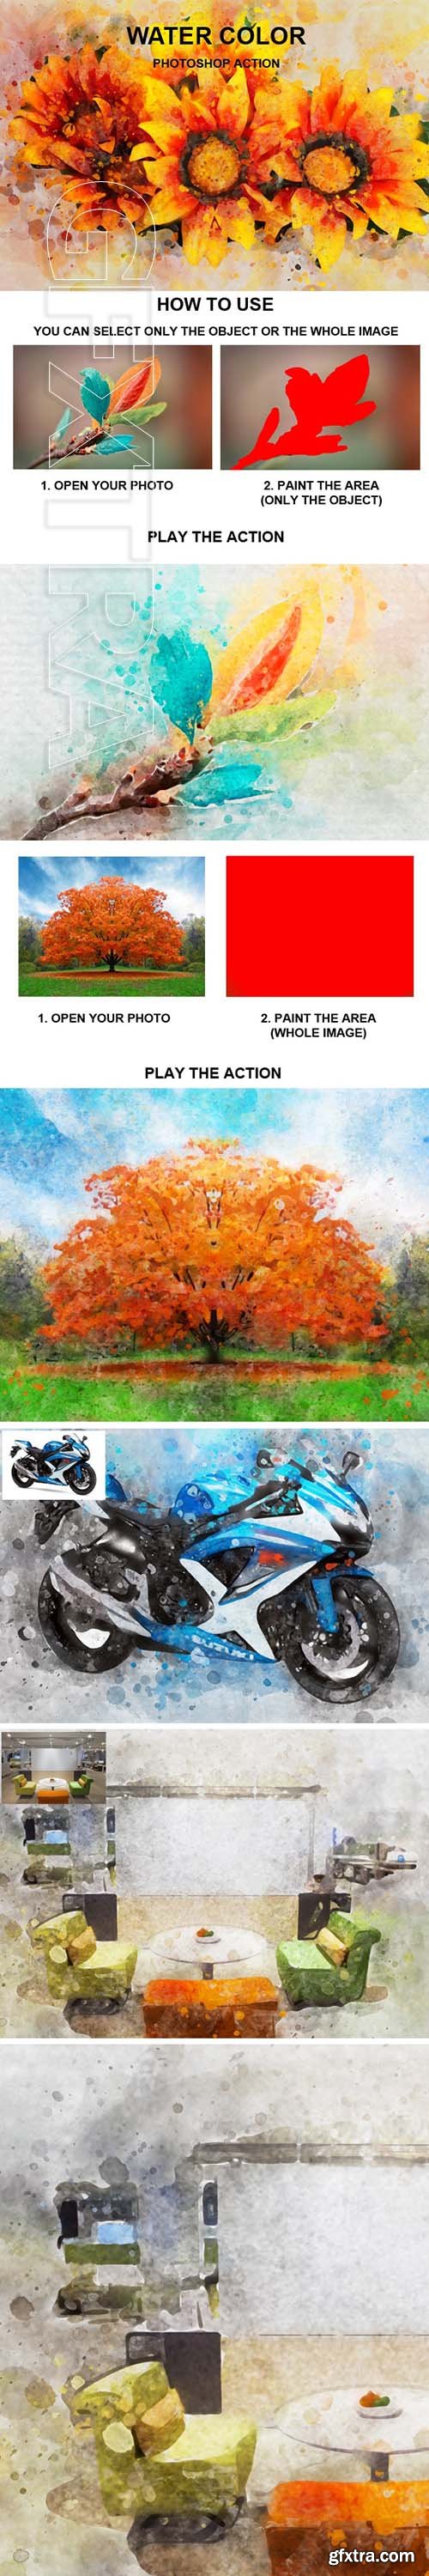 GraphicRiver - Water Color Photoshop Action 24119188